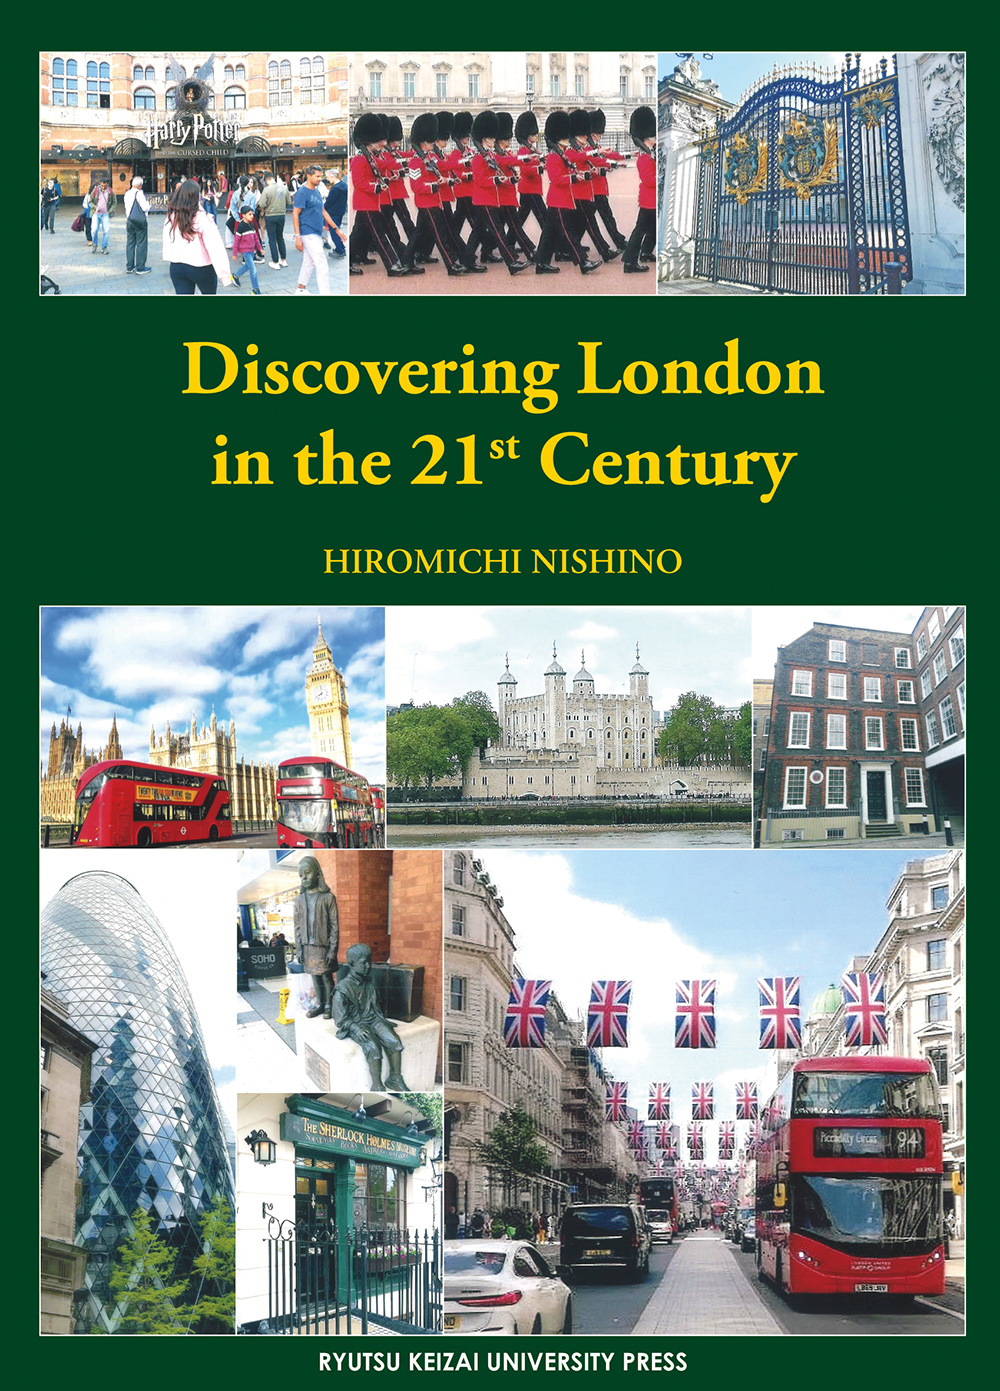 Discovering London in the 21st Century